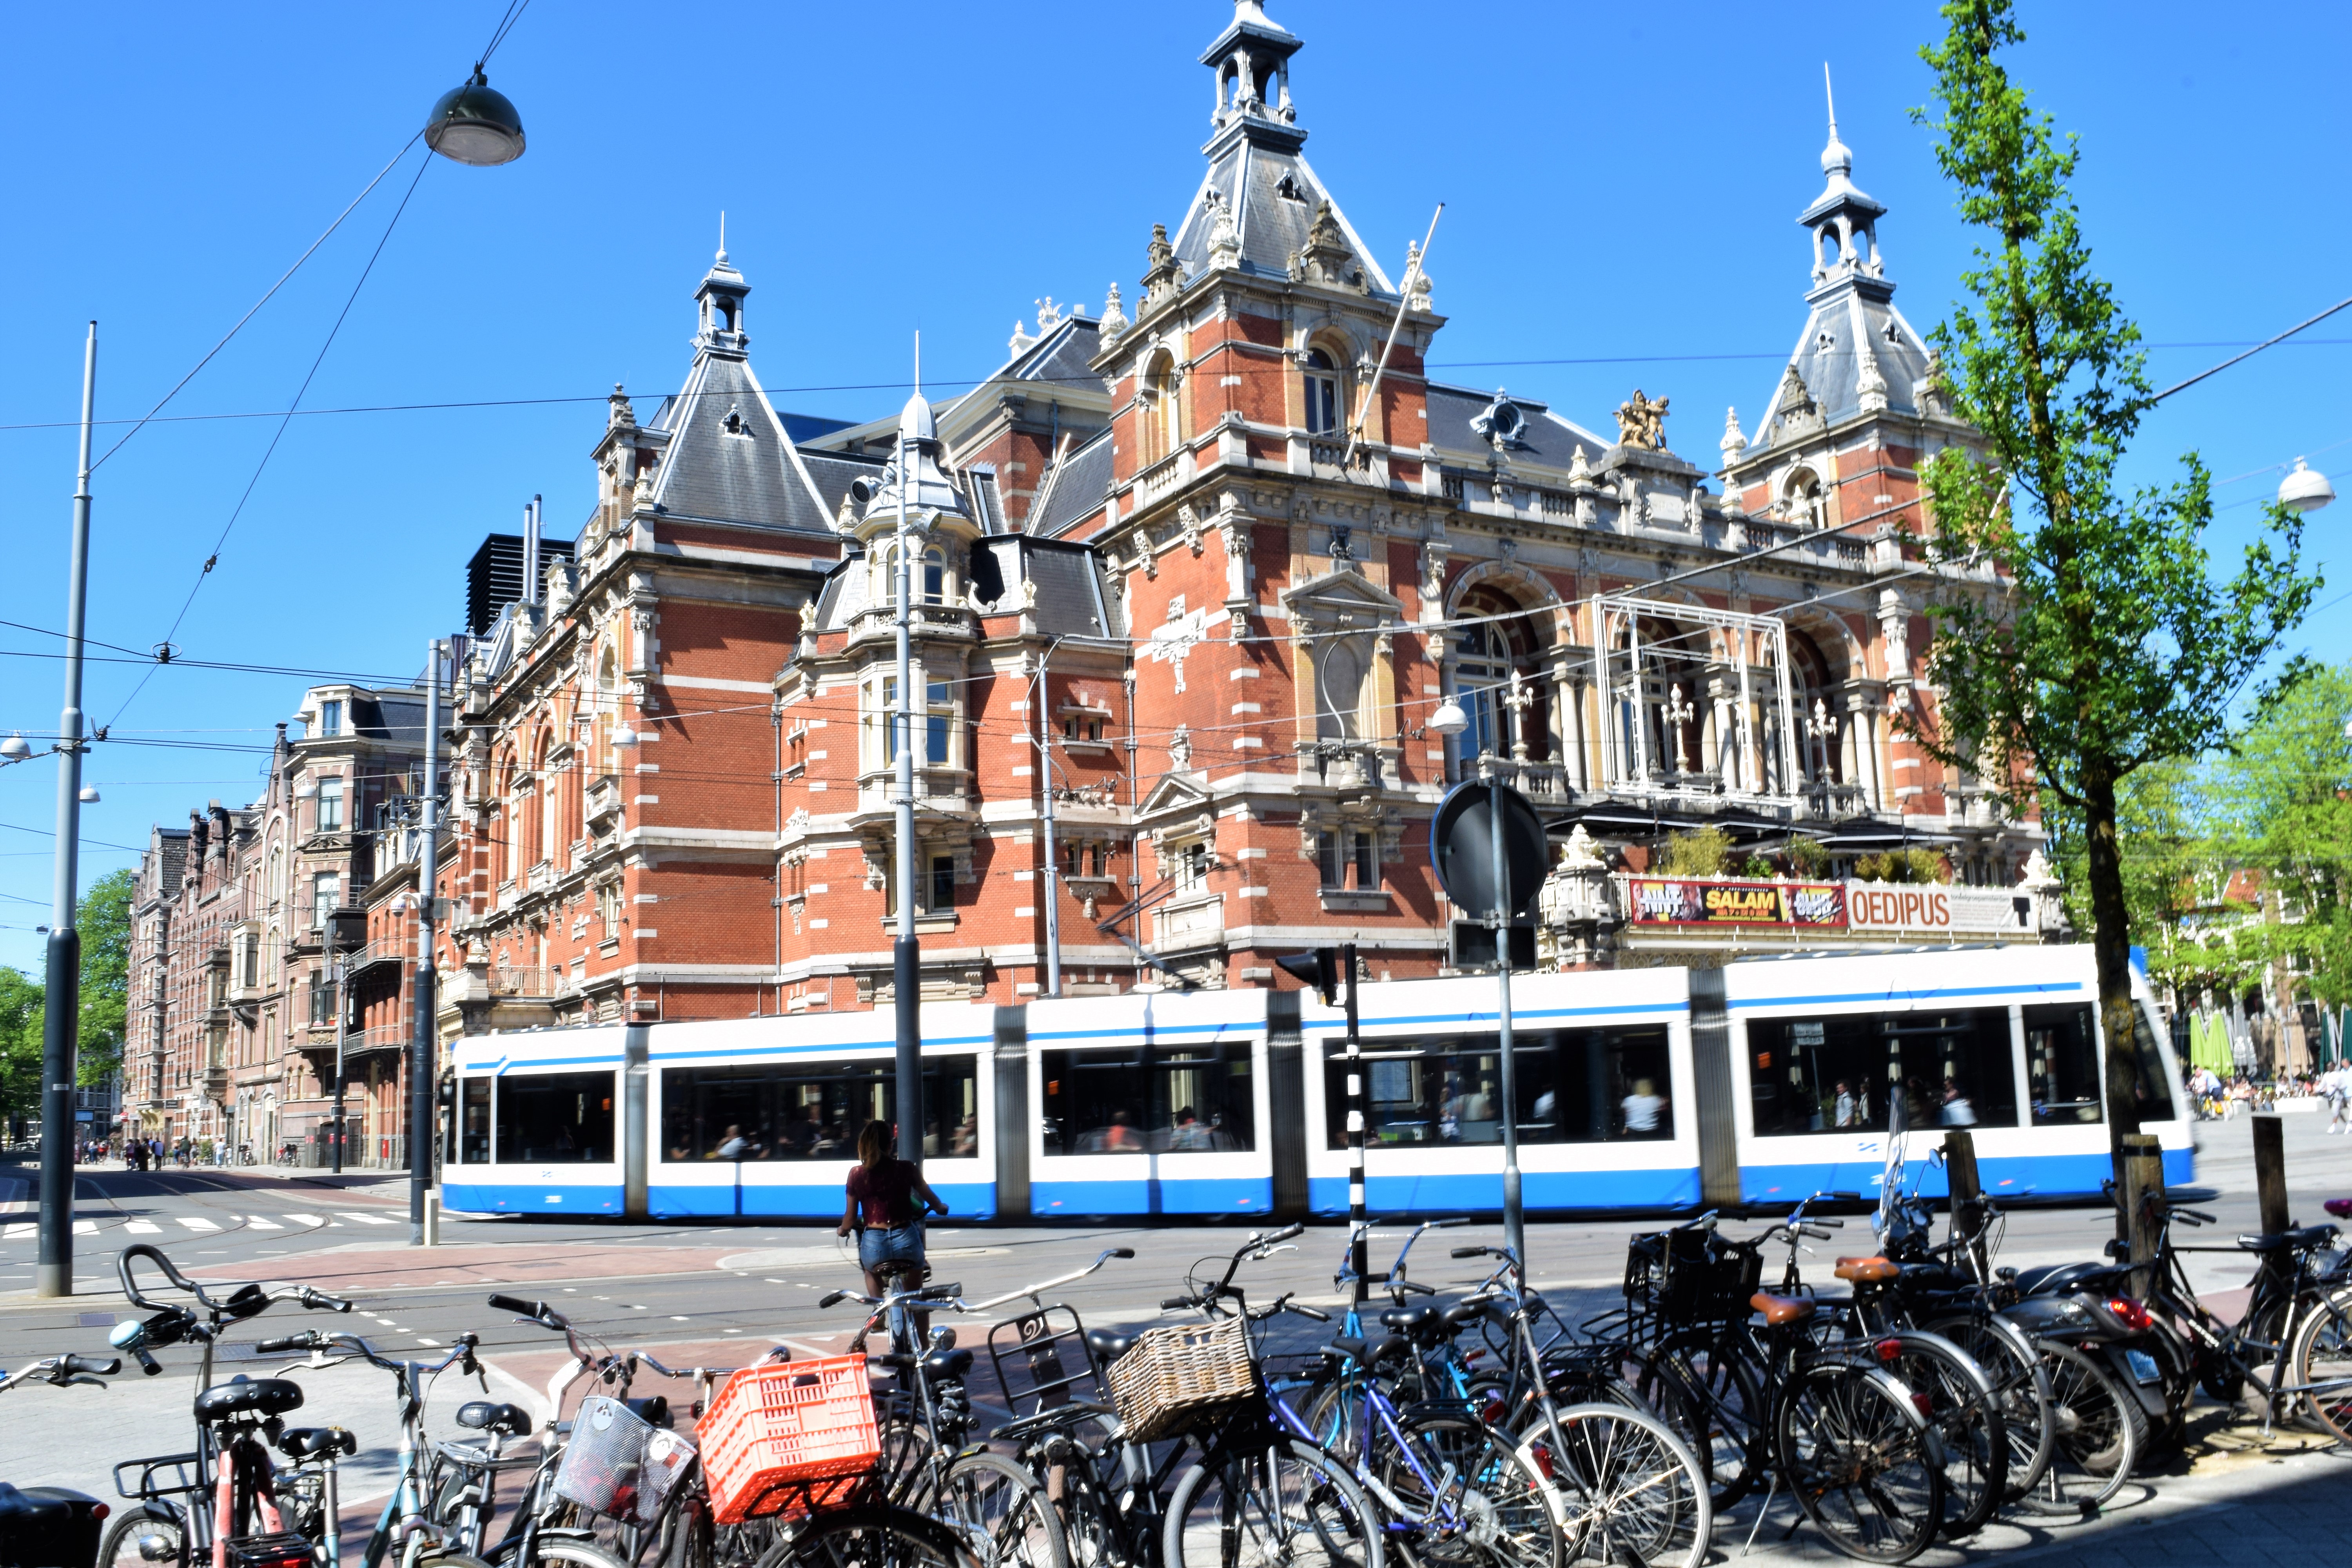 Weekend in Amsterdam: 5 Things to Do & See - LoveJoyBlessings